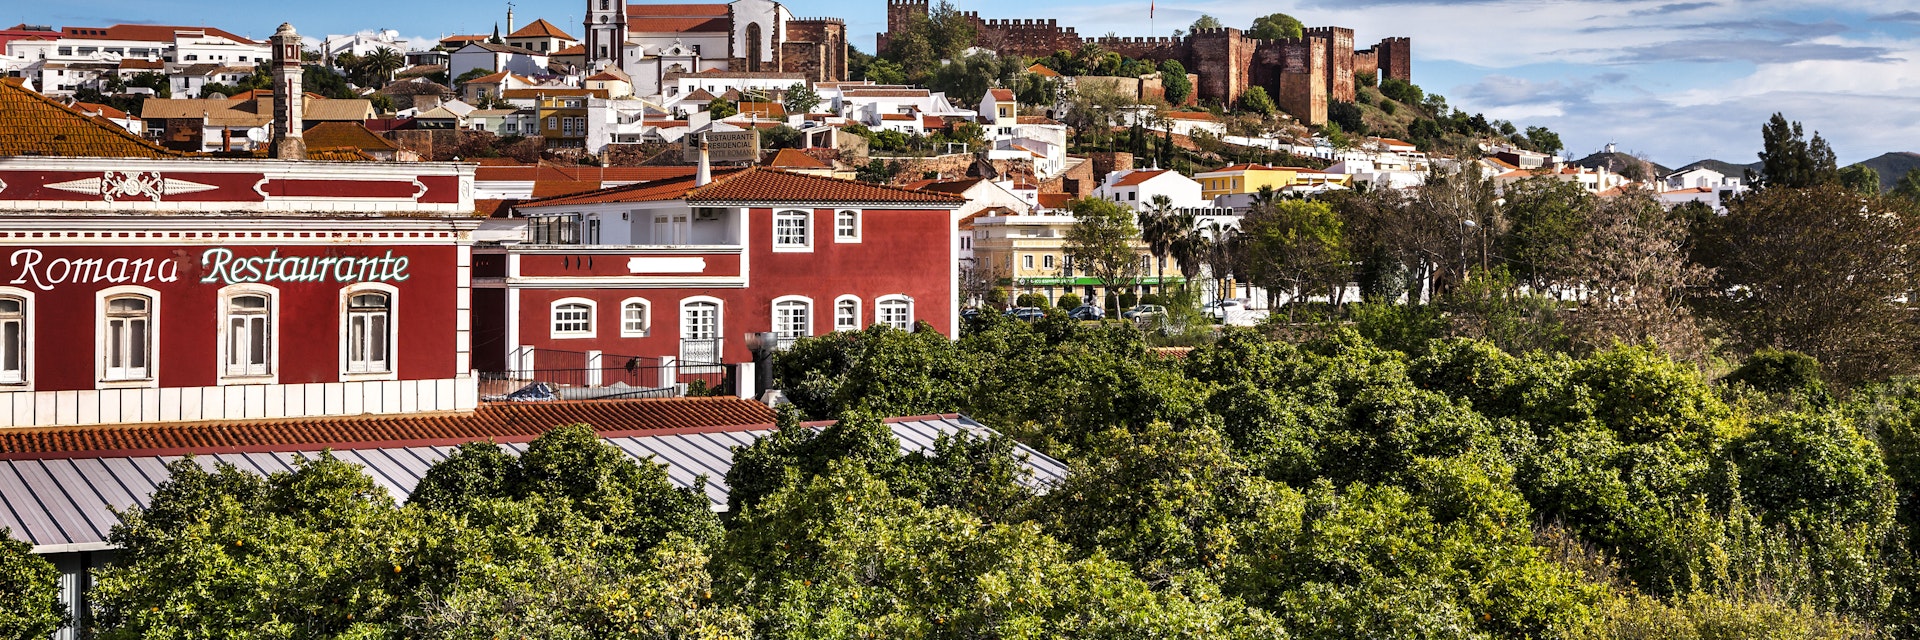 Portugal, Algarve, Silves, Old town with Cathedral and castle